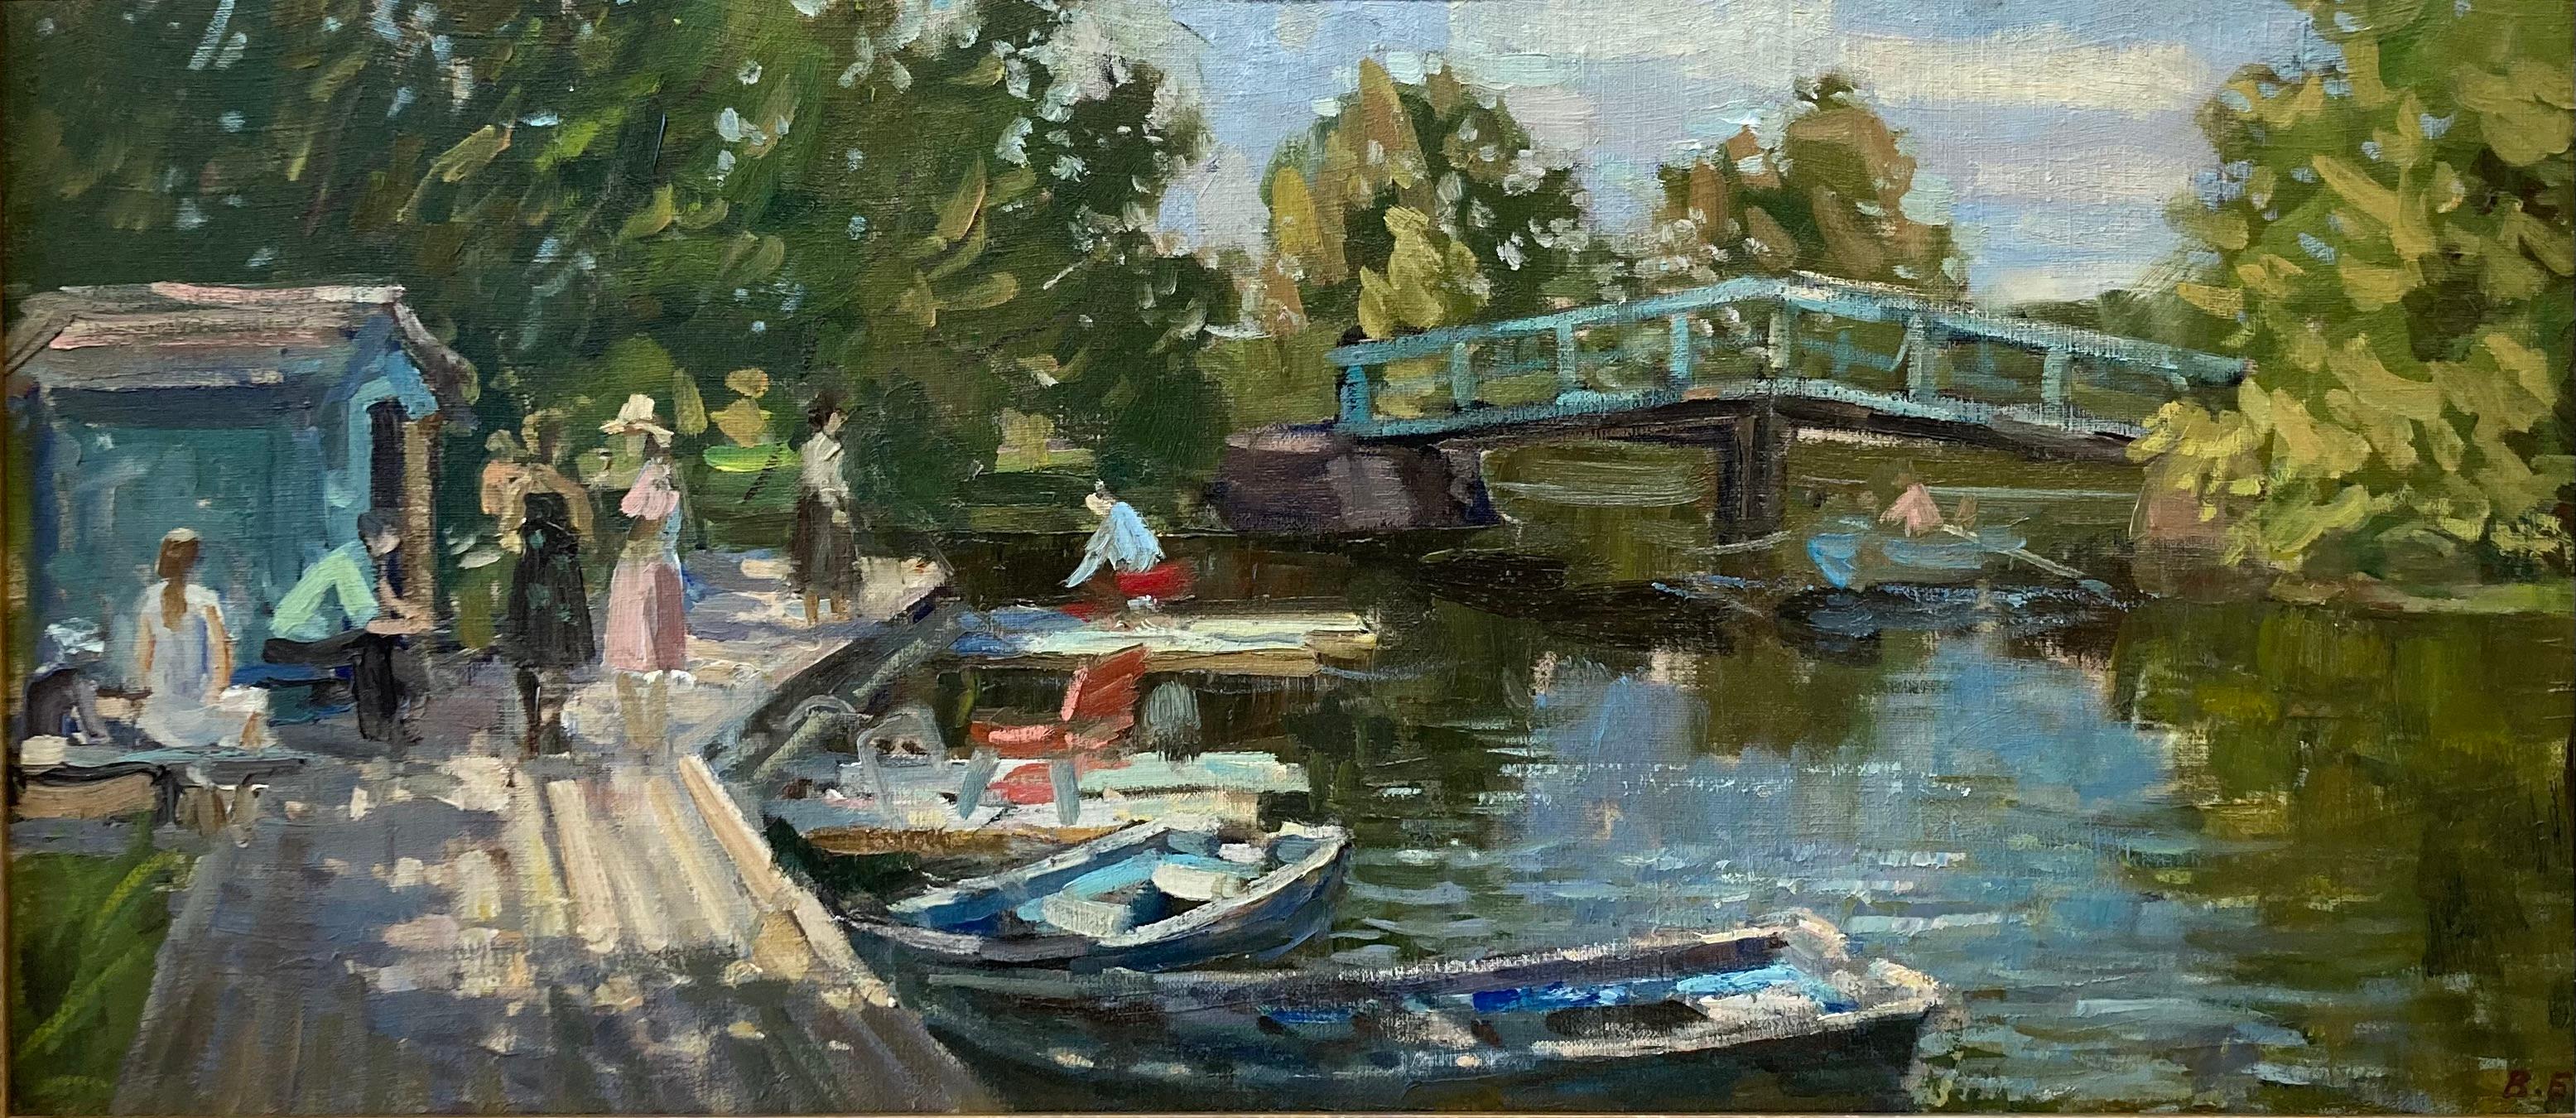 Summer on the Canal - 1999 impressionist oil painting